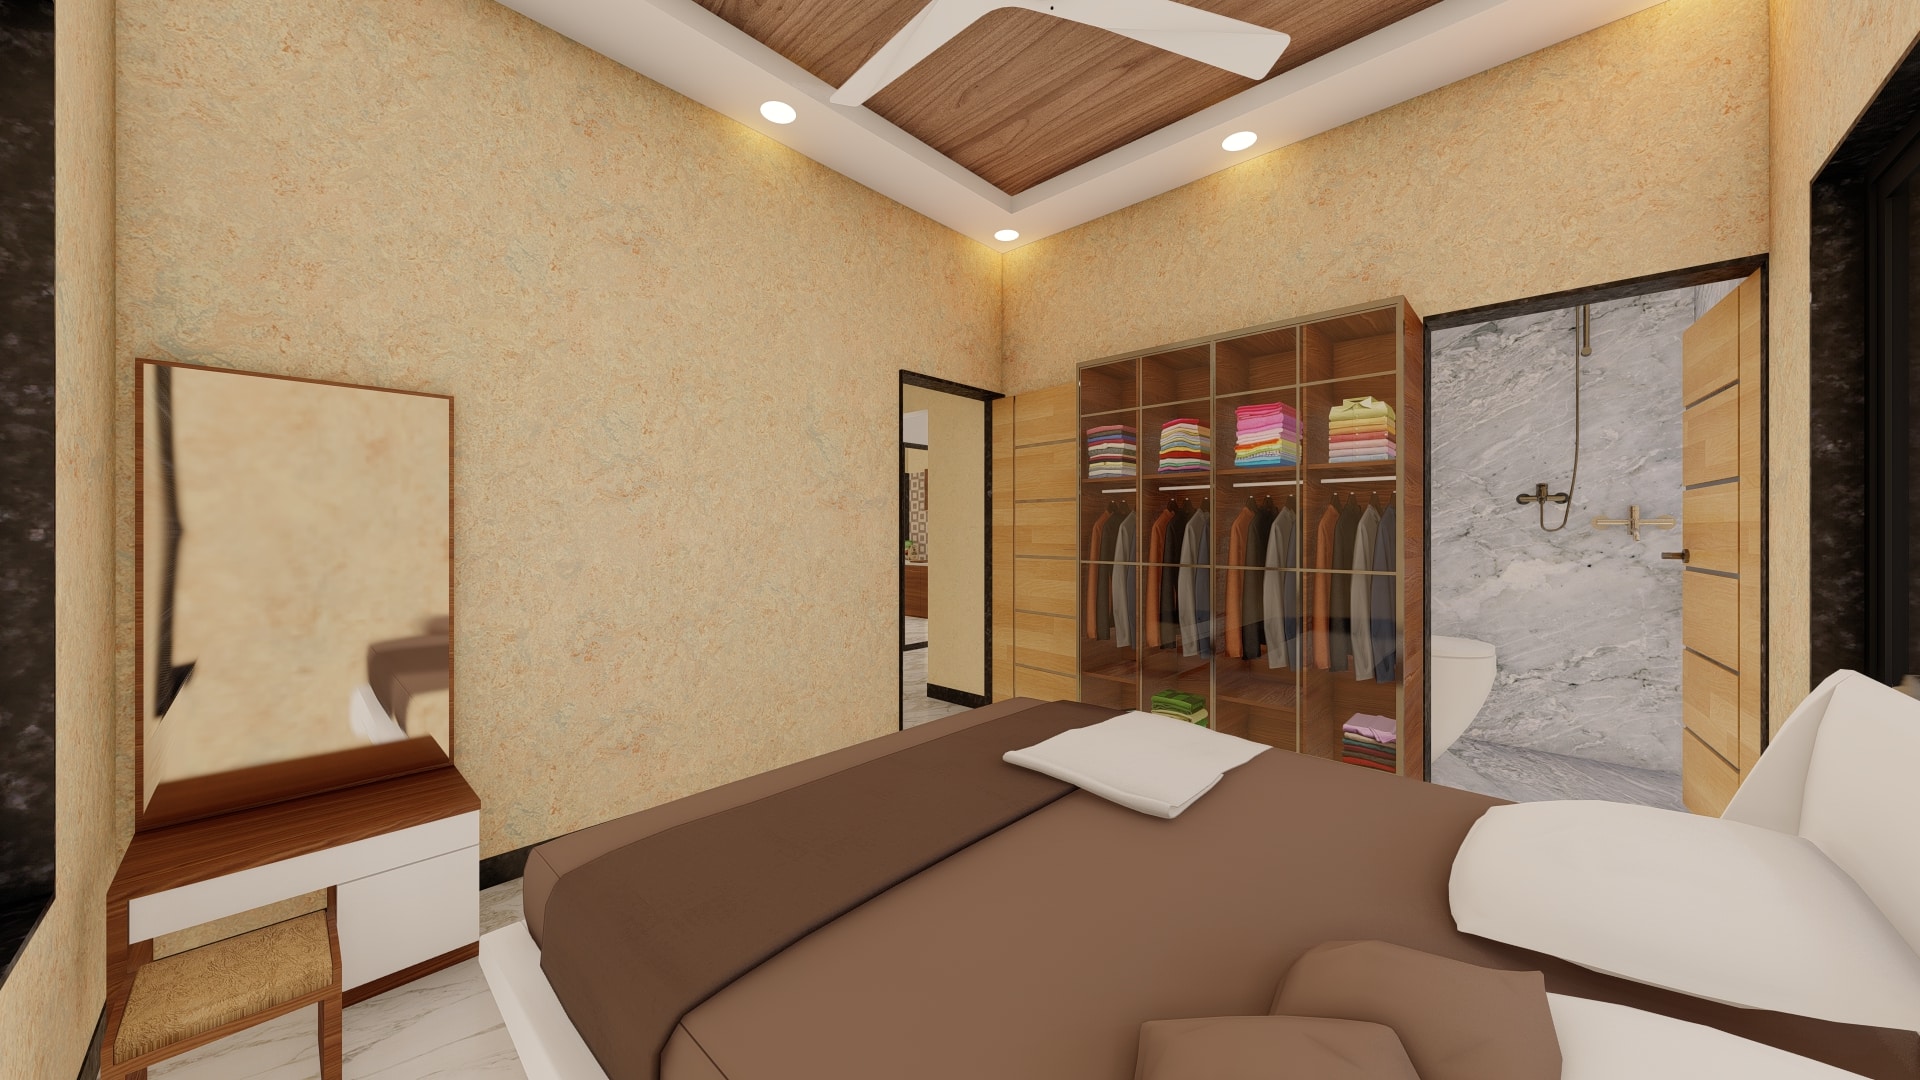 1st bedroom with attached toilet countryside leisure home by urban terrace